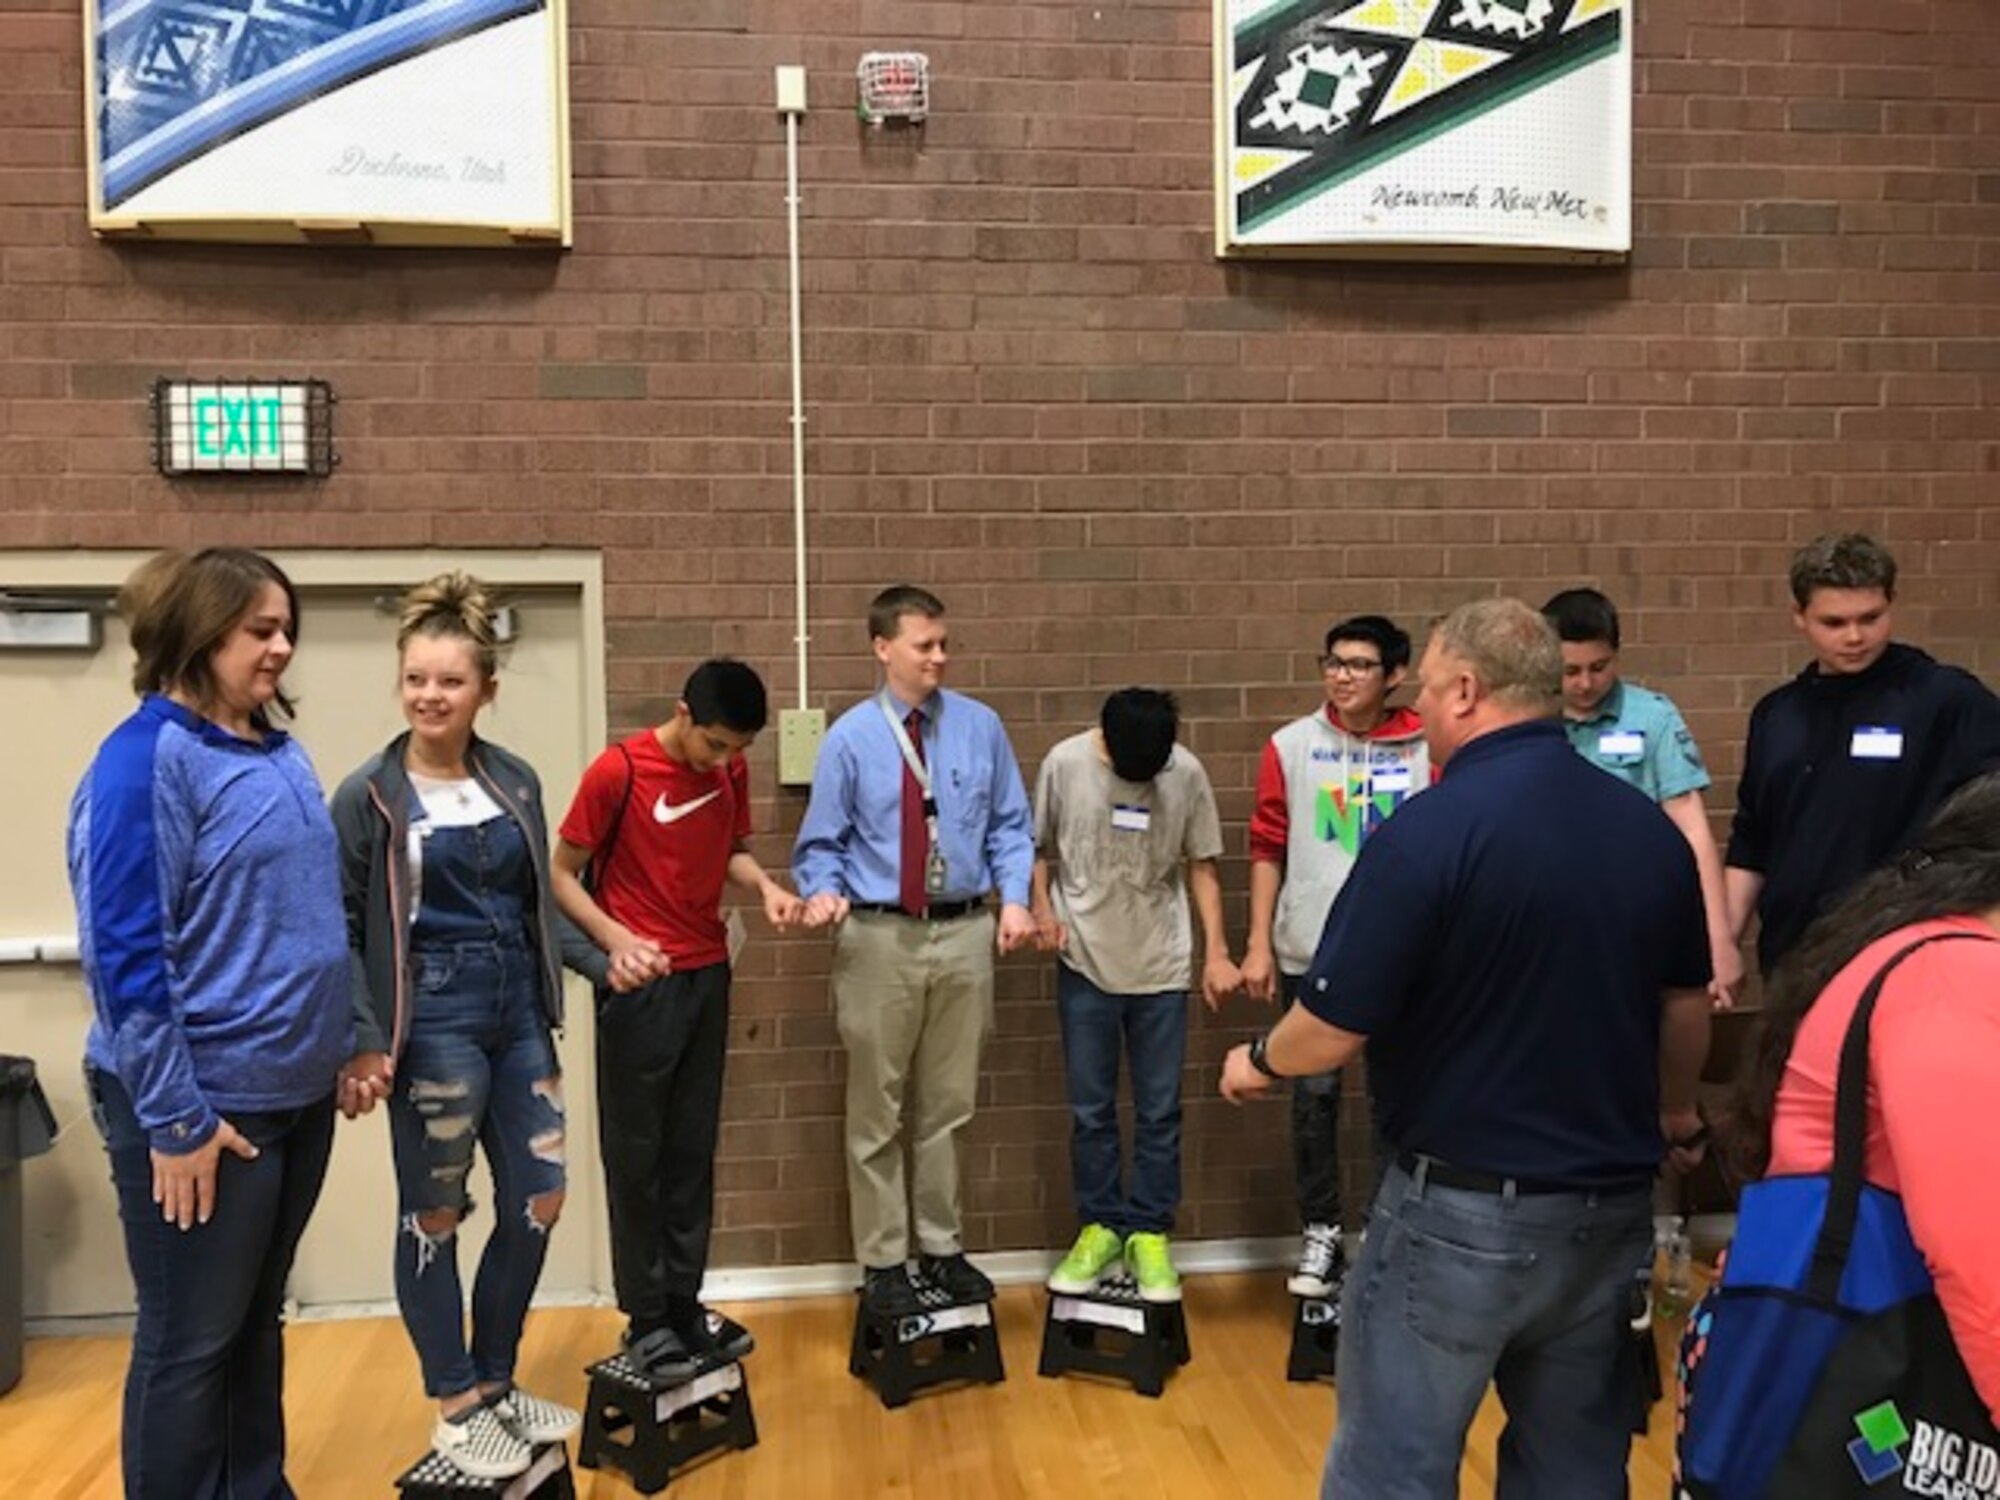 Hill Air Force Base electrical engineer Sebron Farmer conducts an electricity demonstration with students at Monument Valley High School in Kayenta, Utah, during the San Juan Career Fair March 27, 2019. Hill AFB computer scientists and engineers presented the electricity demonstration, taught some basic coding skills and encouraged students to focus on STEM-related subjects, giving them an idea of the important work they could do if they chose an Air Force career. (Courtesy photo)